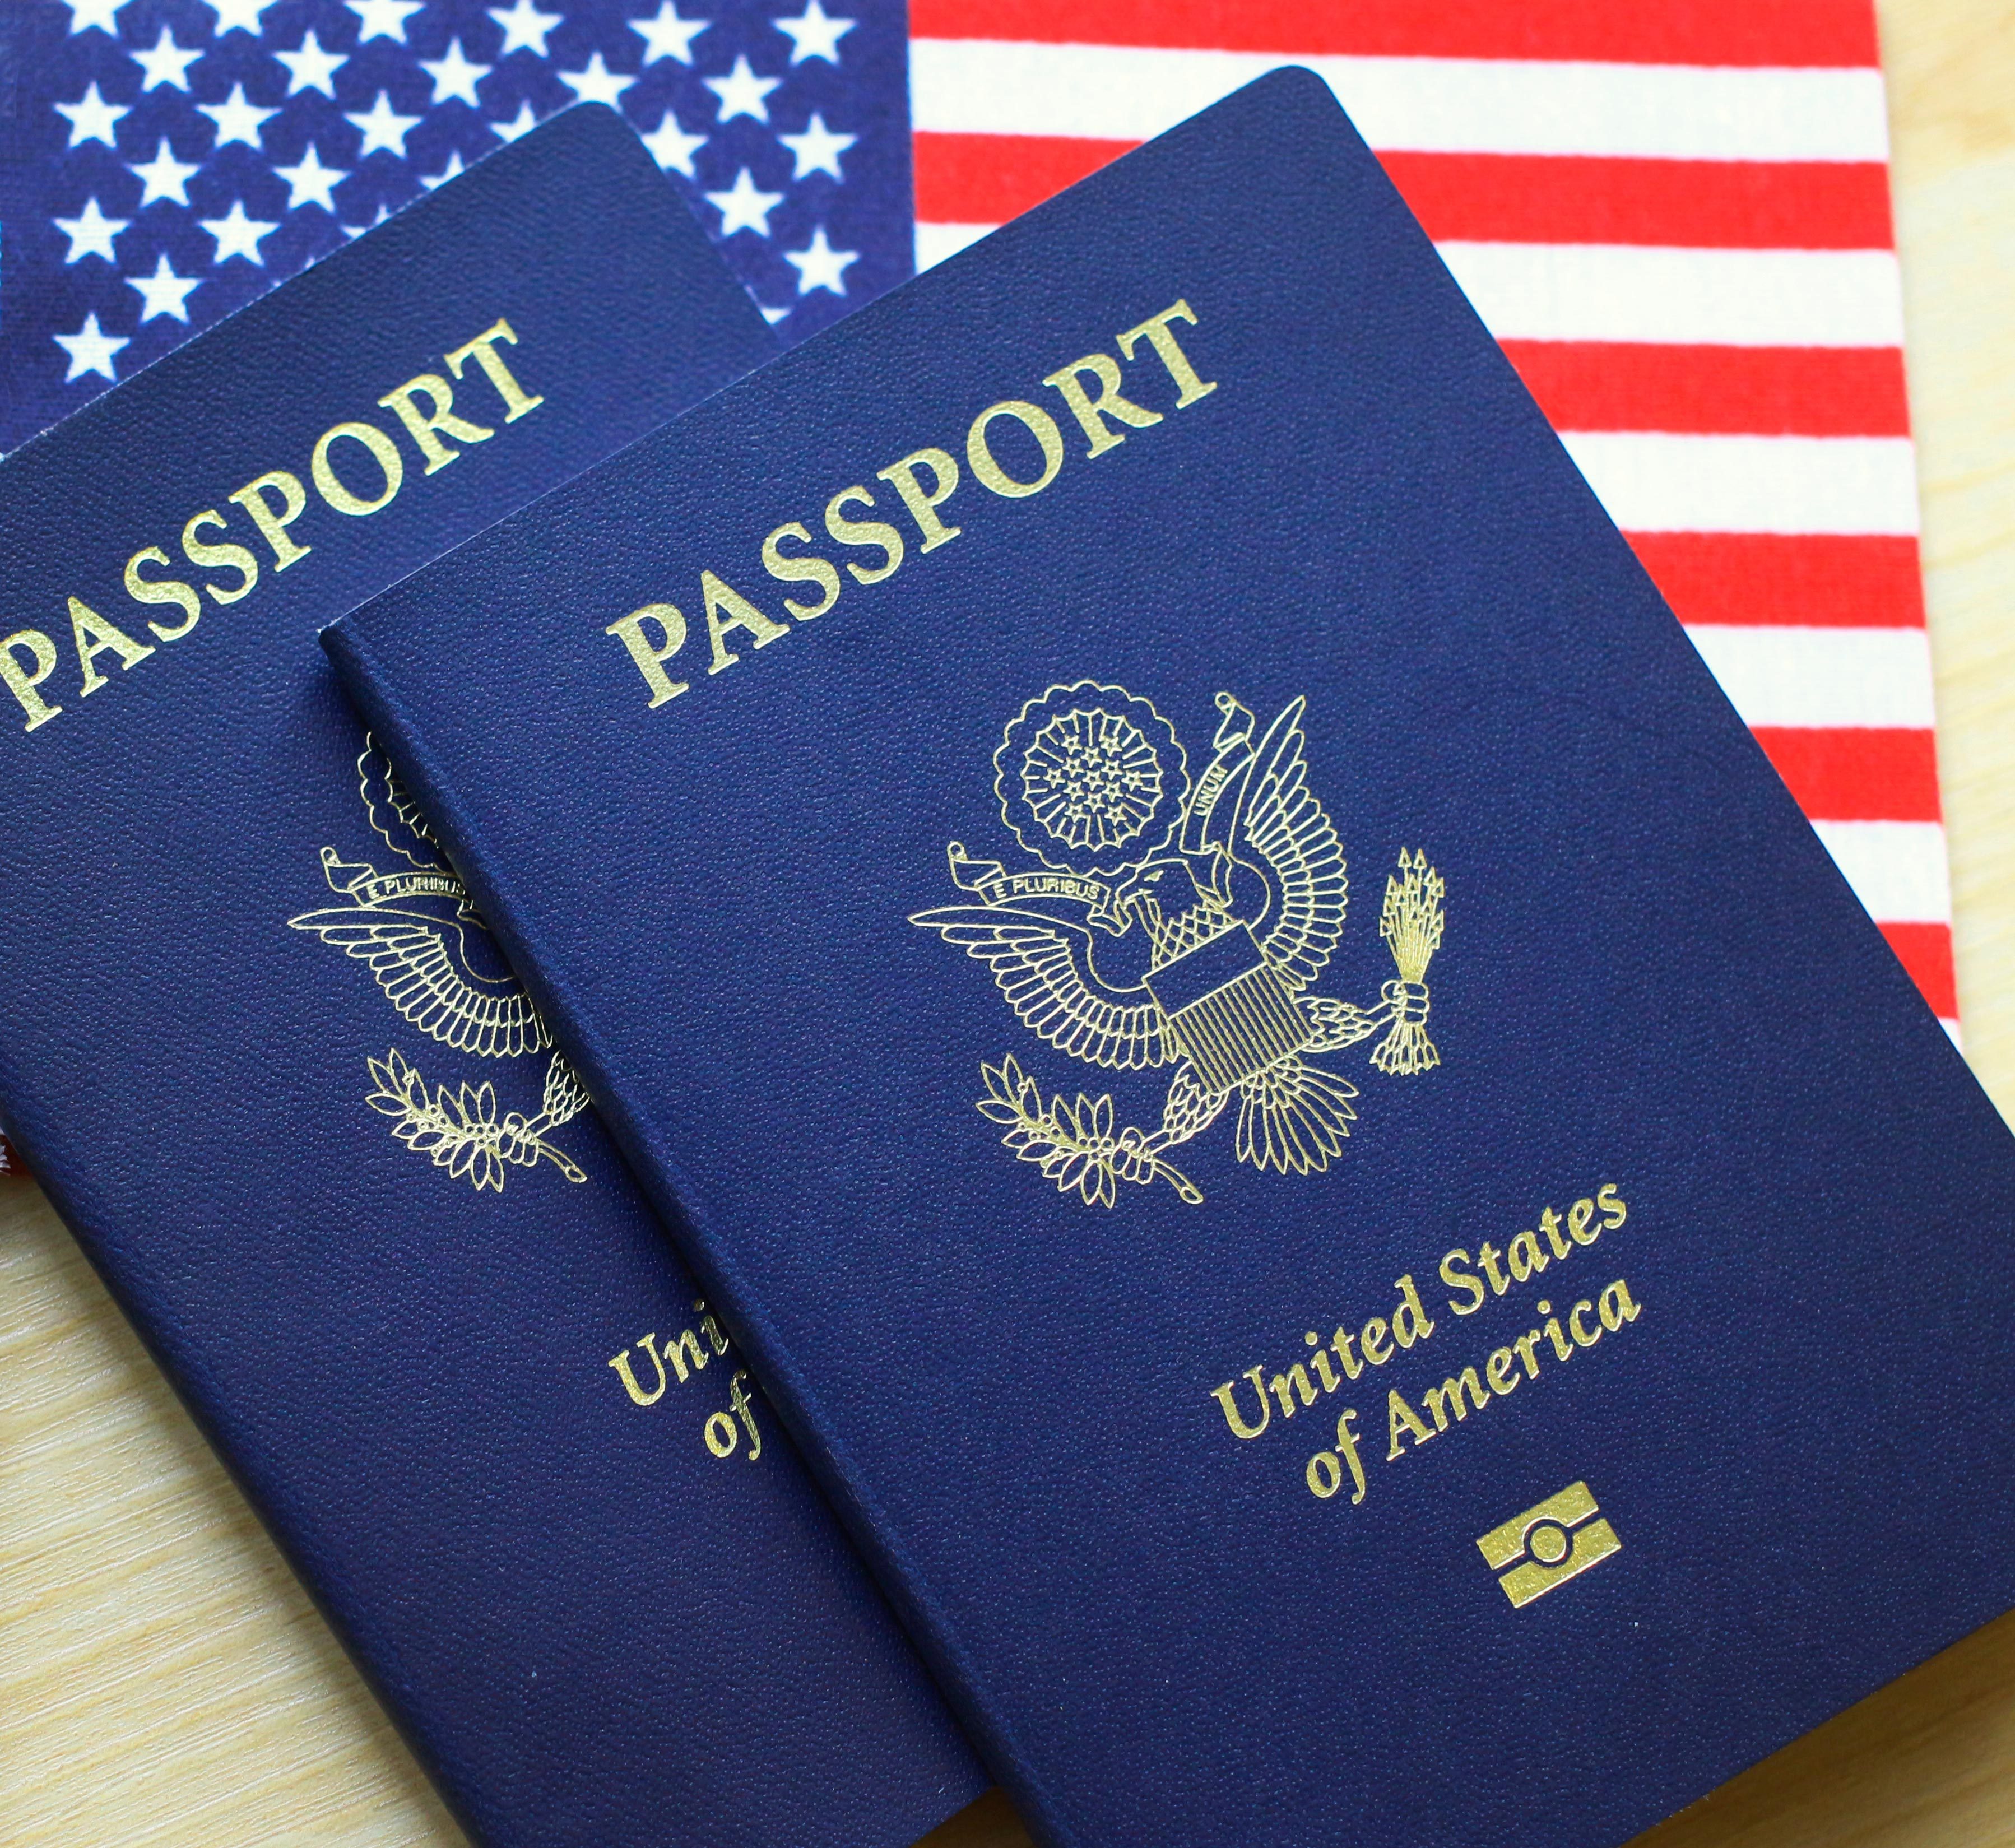 How Long Does It Take to Get a Passport? Reader's Digest